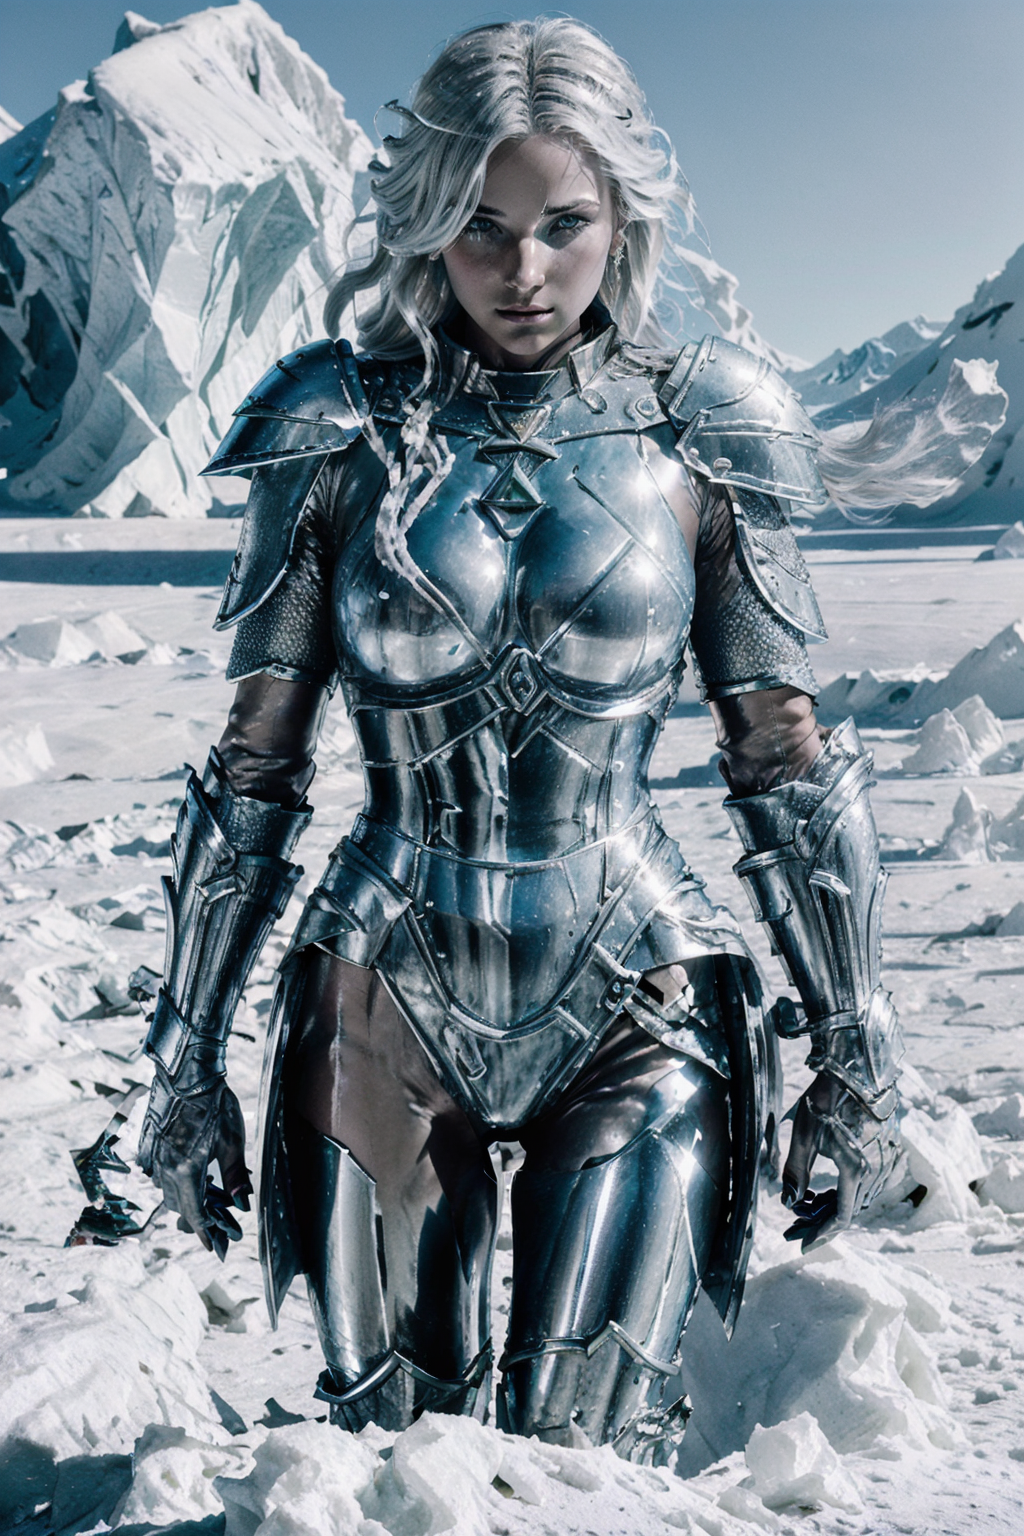 A woman in a silver armor suit standing in a snowy environment.